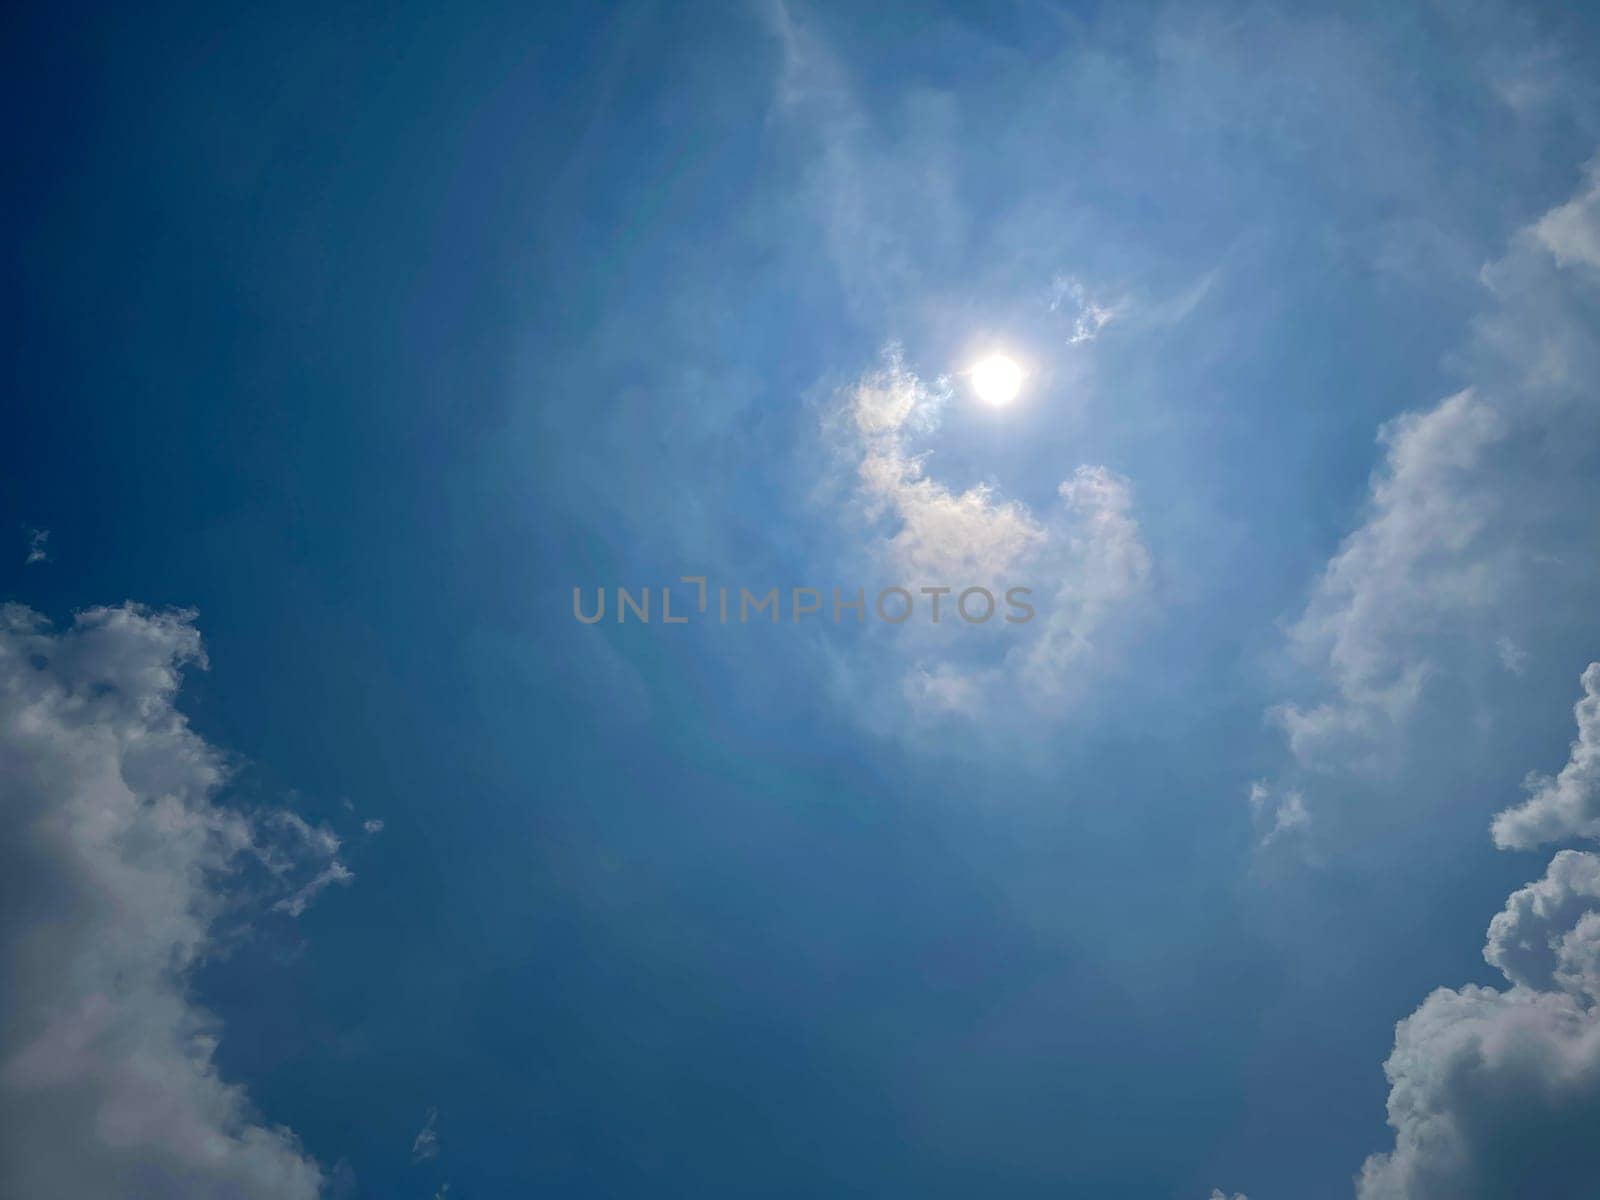 Heavenly white clouds on the blue sky with the sun appeared perfect for multimedia texture or background